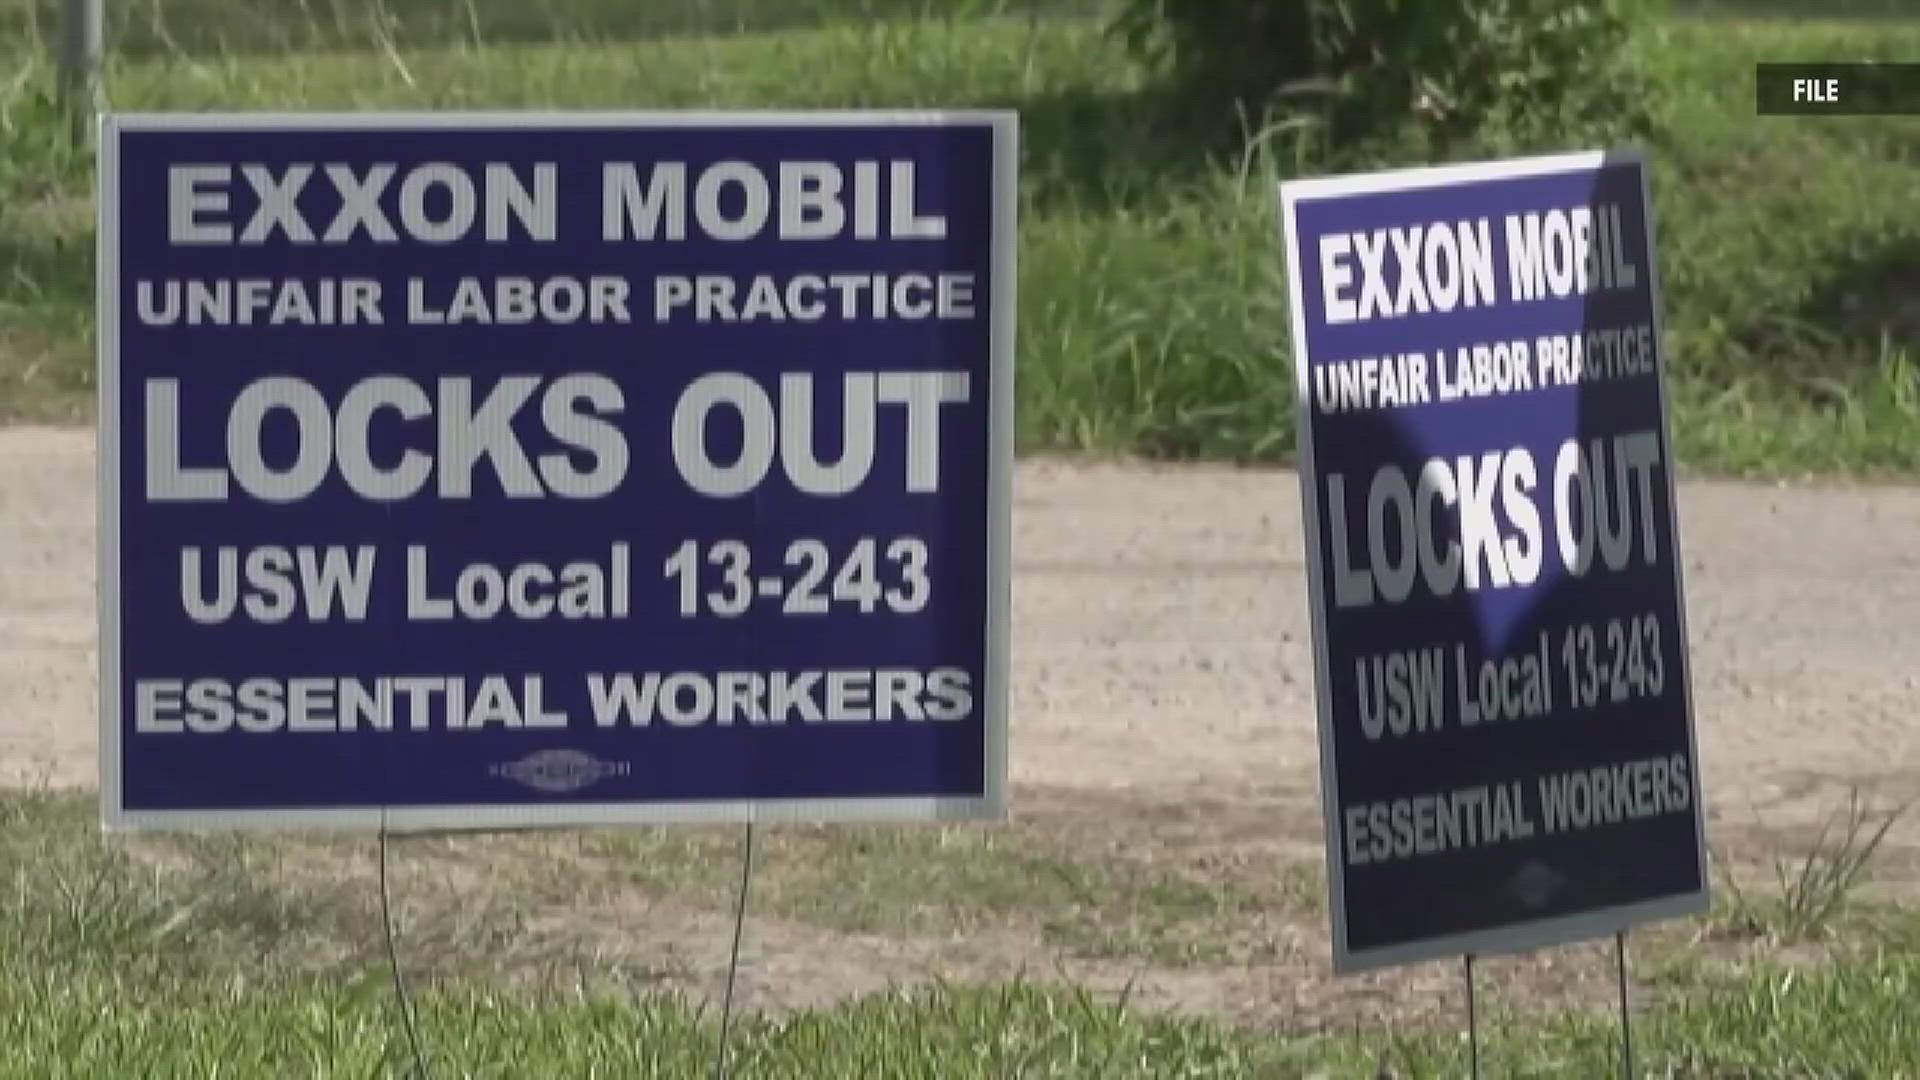 During day three of the hearing, Bryan Gross, a representative for the USW, was the first witness called by ExxonMobil to testify.